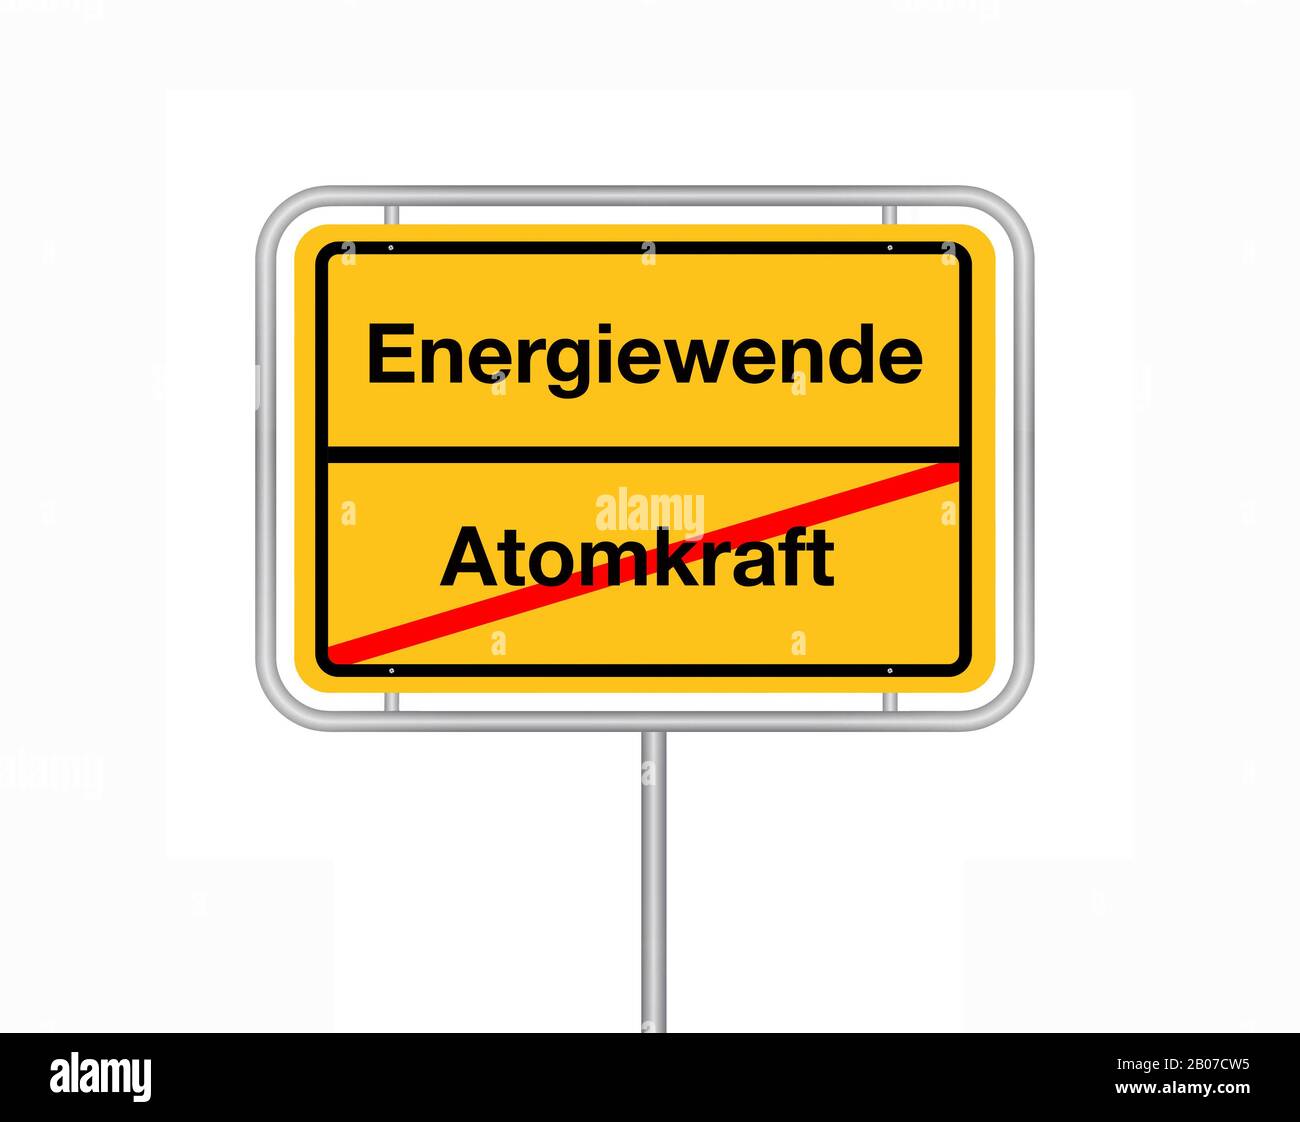 City Limit Sign lettering Atomkraft - Energiewende, energia atomica - cambiamento energetico, Germania Foto Stock